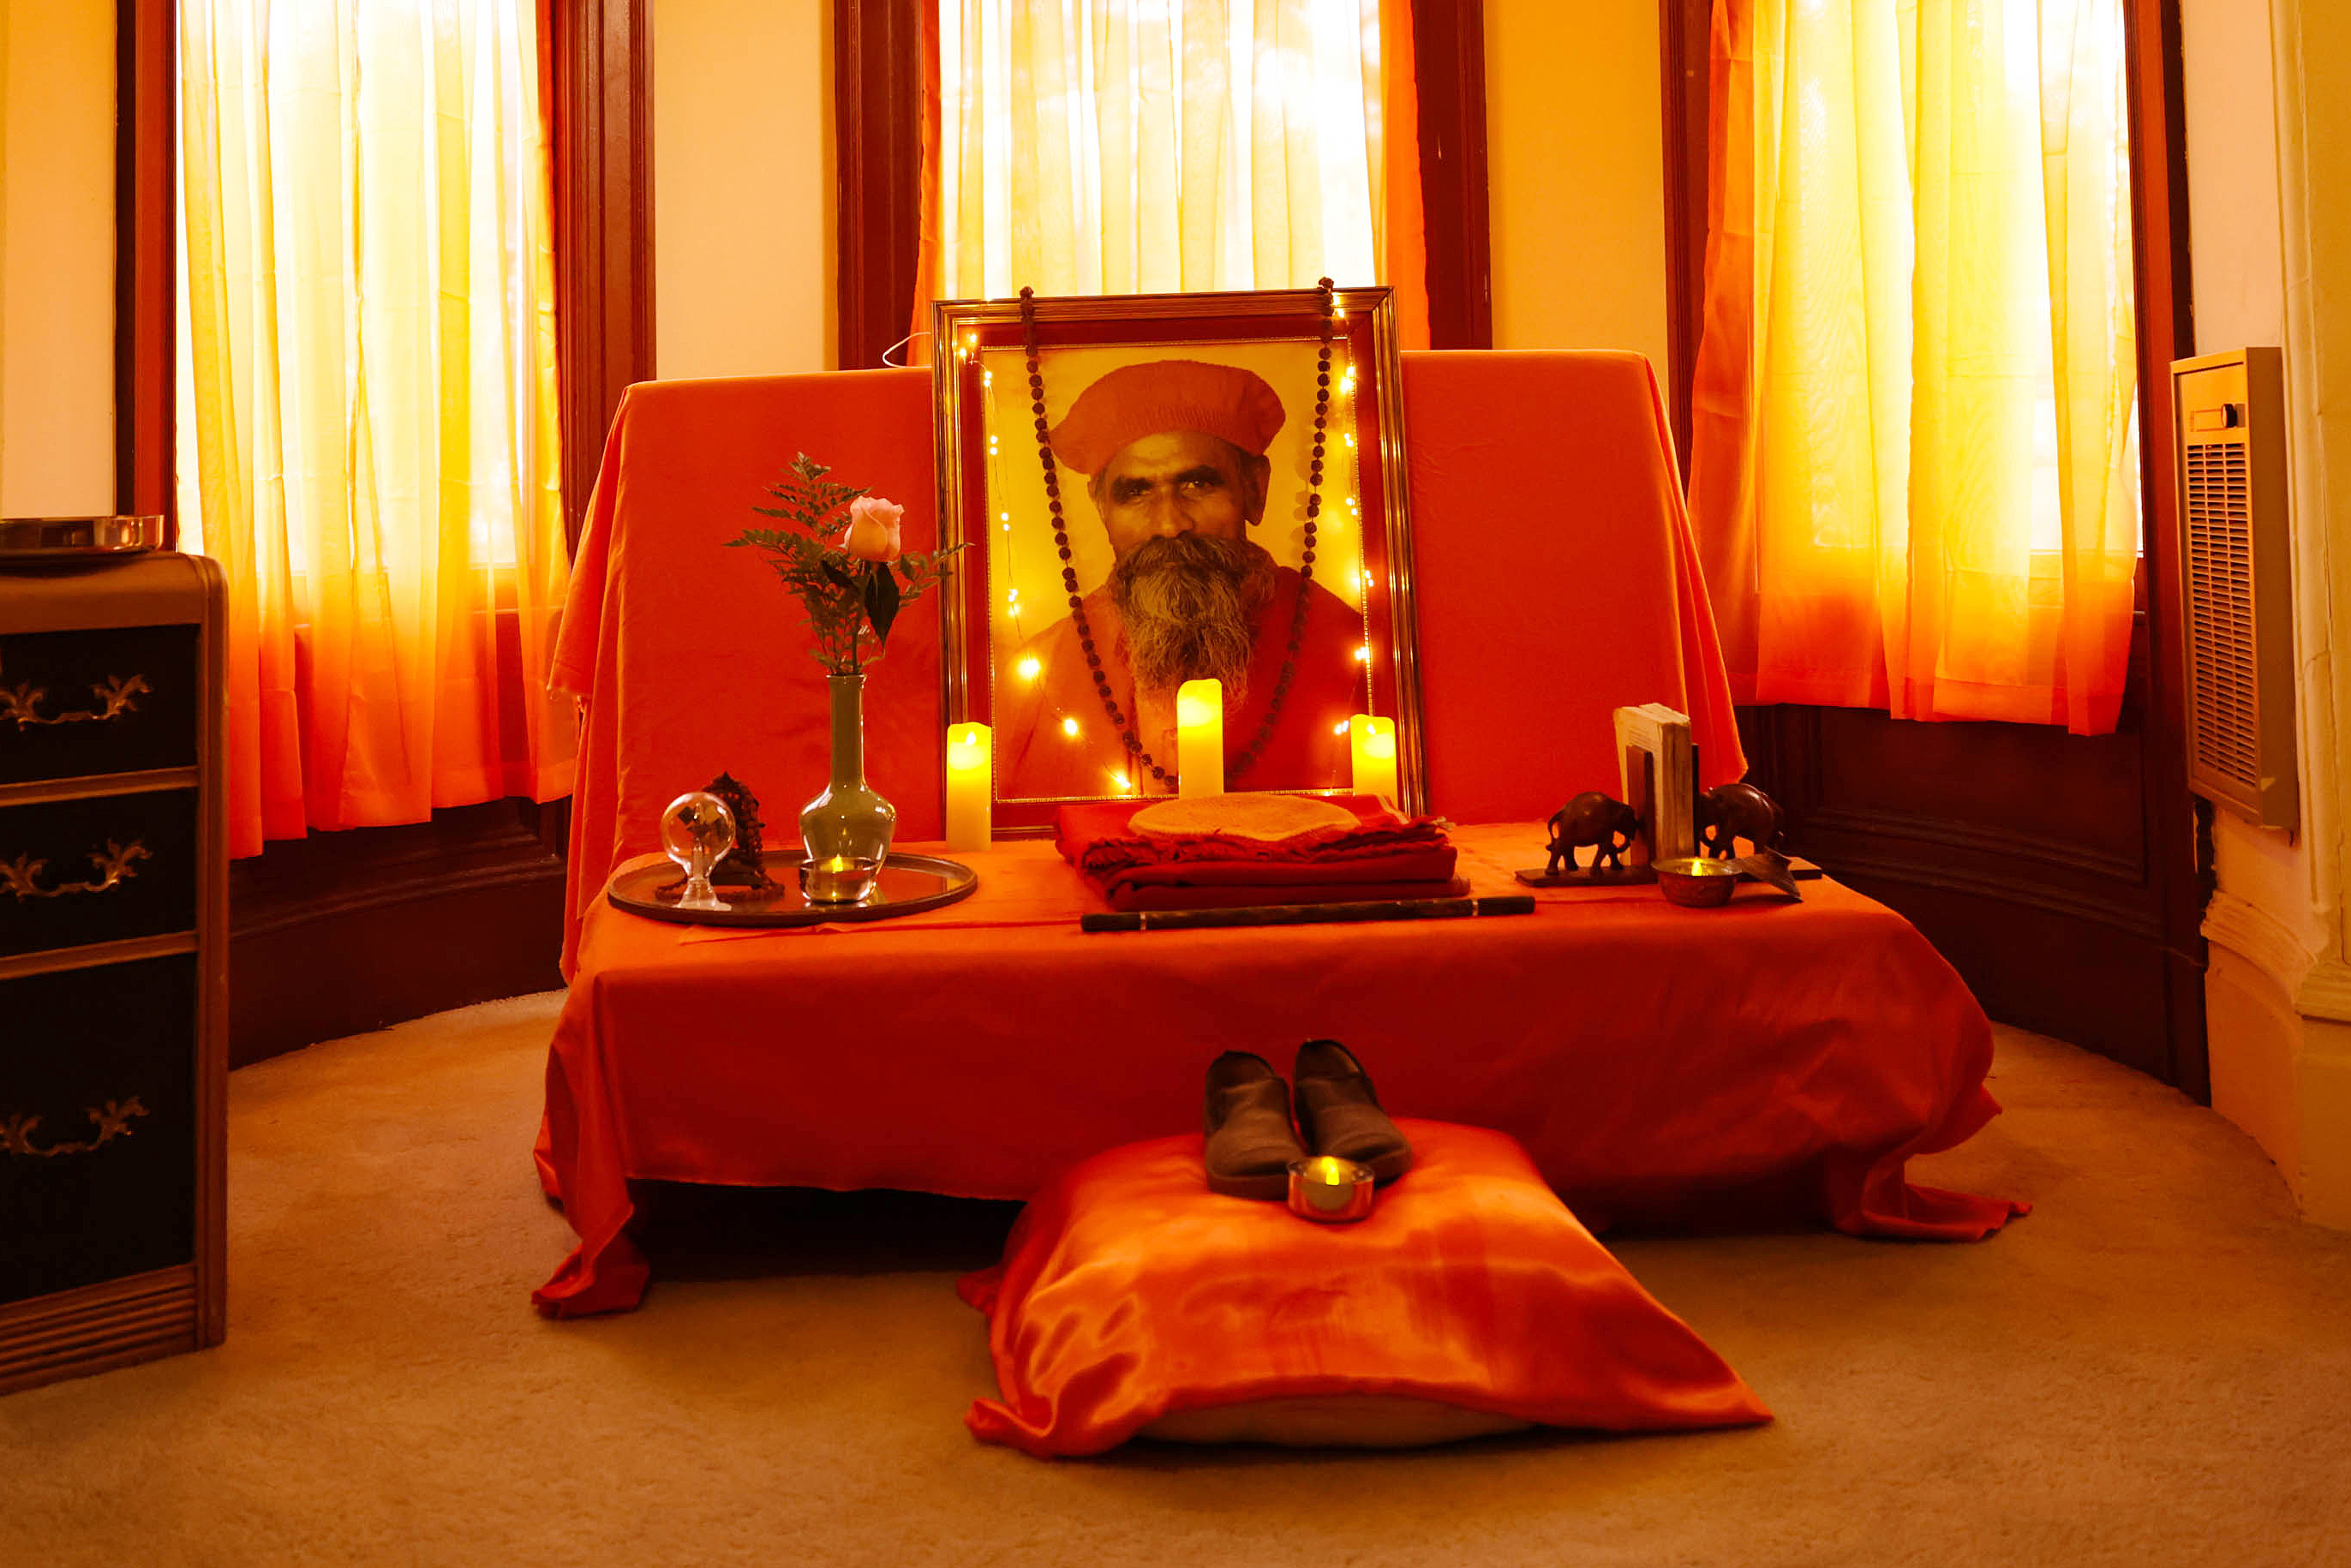 A shrine including candles, flowers and another items on a couch with the centerpiece photo of Shri Brahmananda Sarasvati.